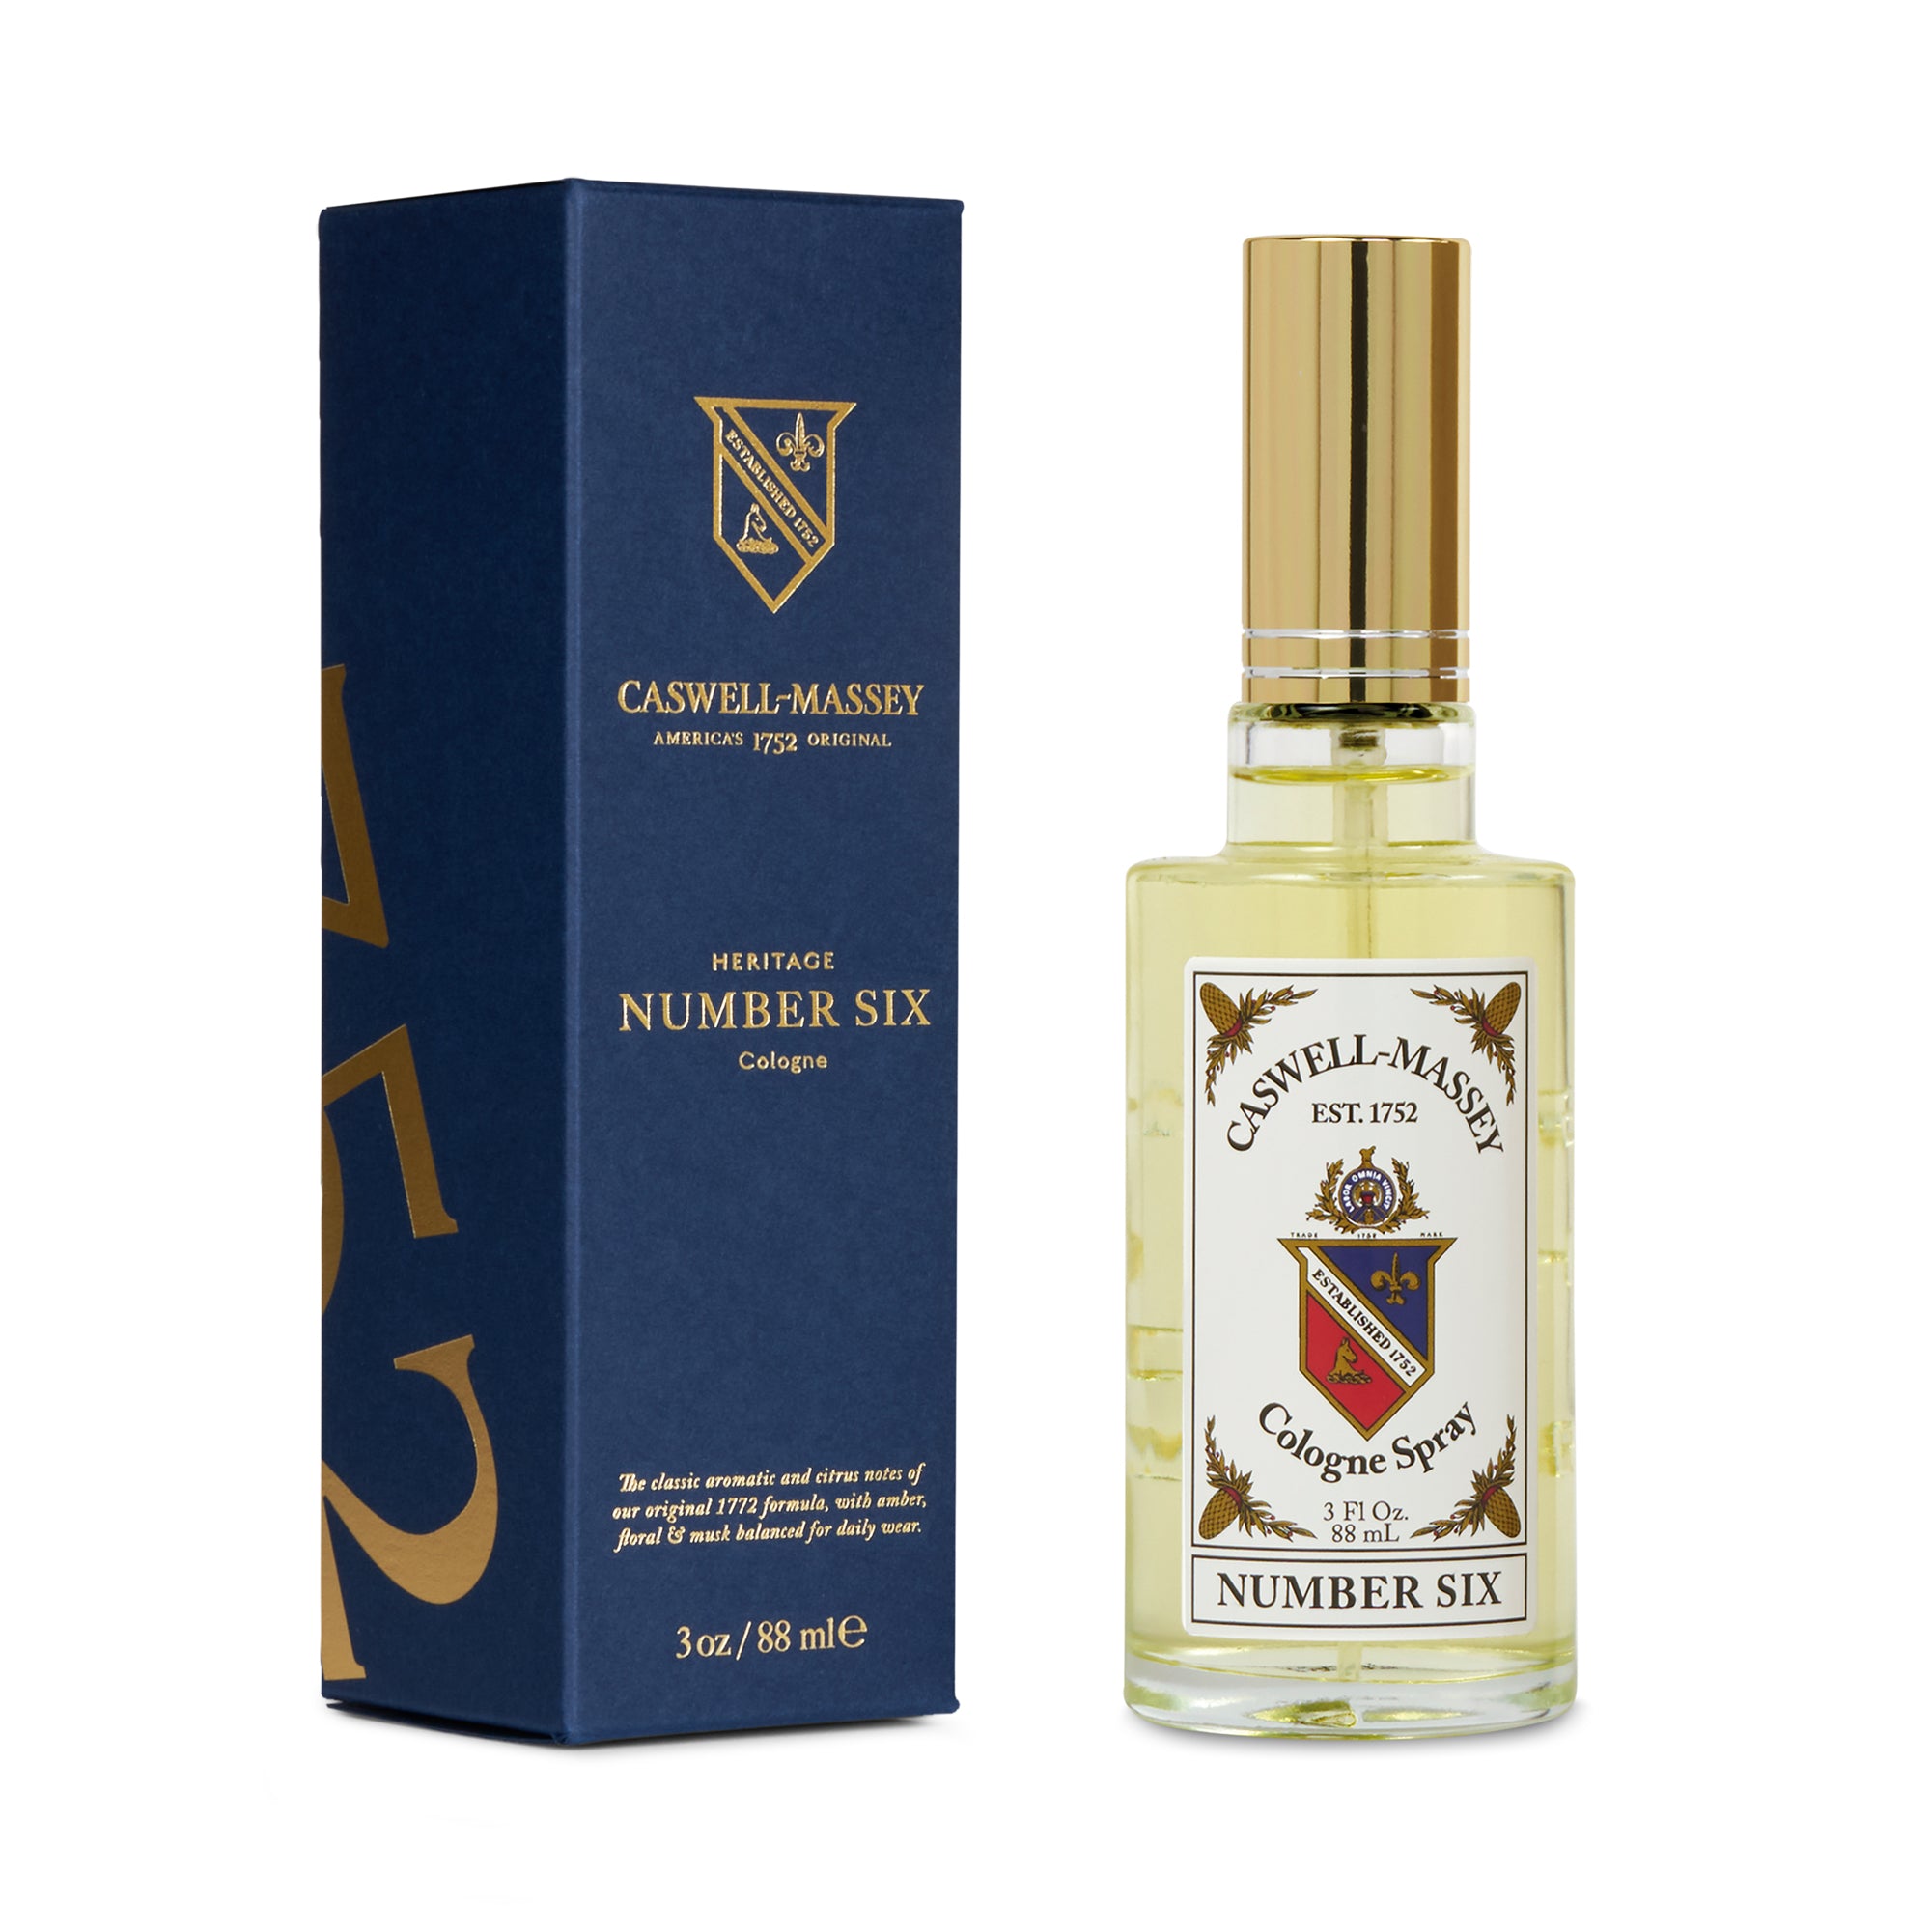 Caswell-Massey - Number Six Cologne Spray